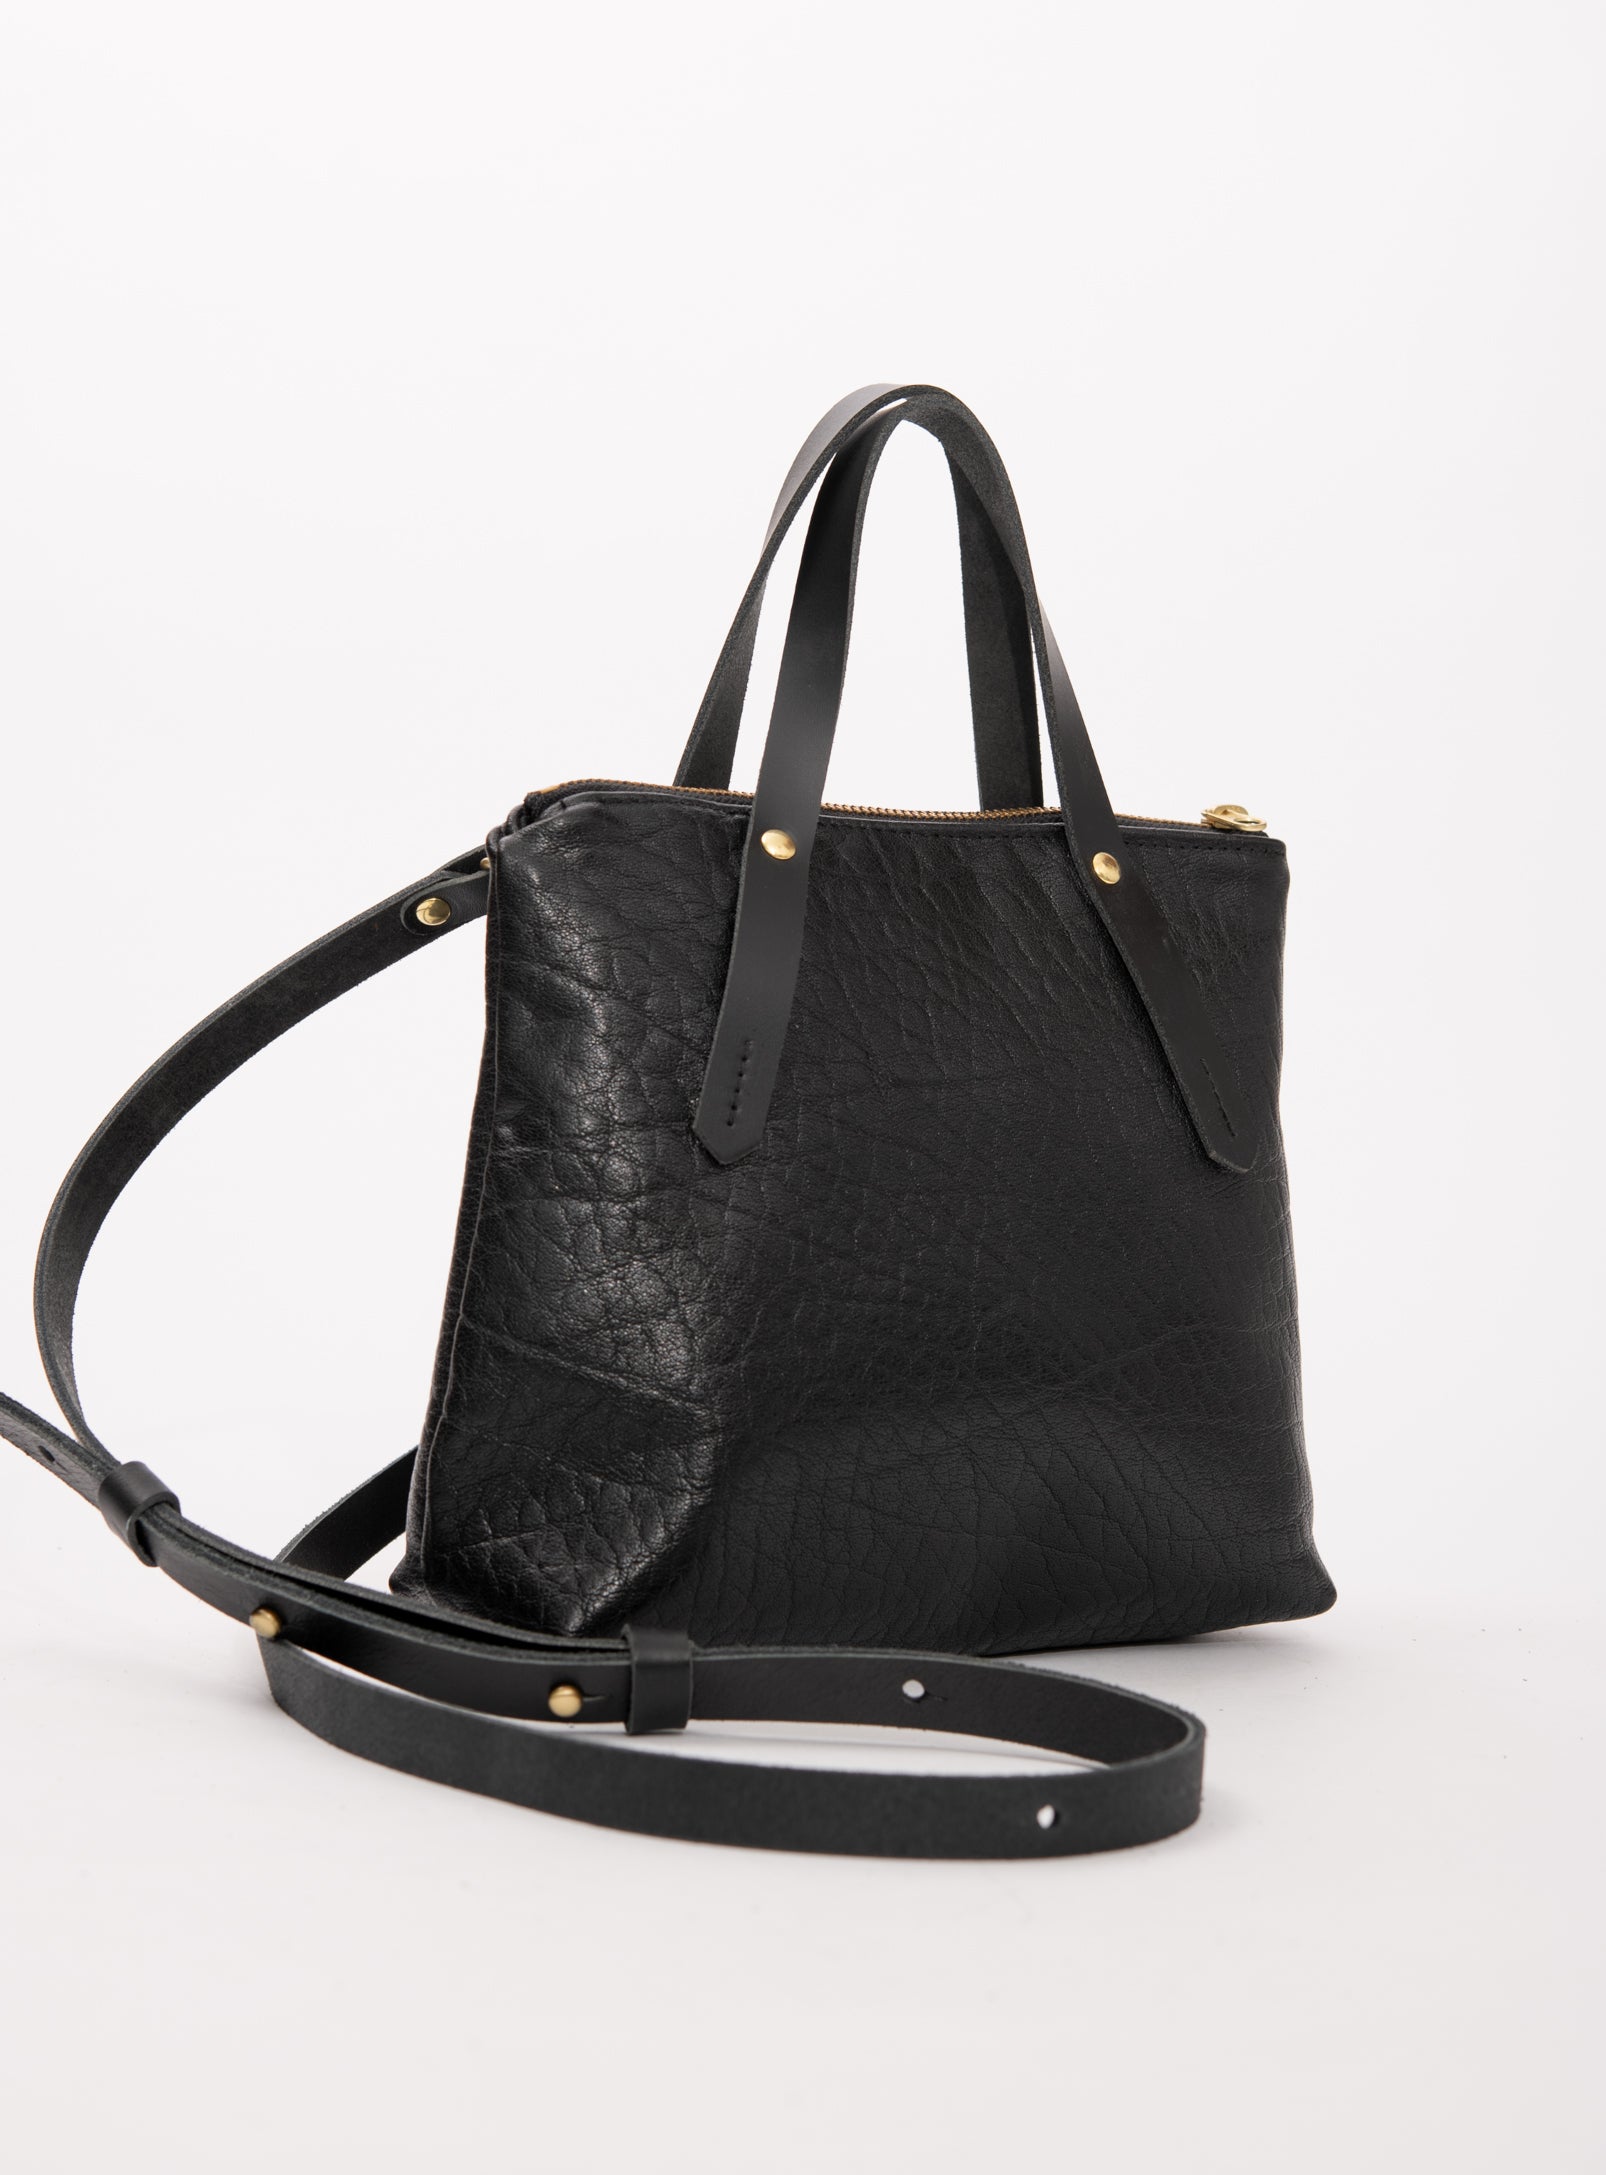 Leather handbag with crossbody strap PAPINEAU model, Veinage handmade in Montreal, Canada